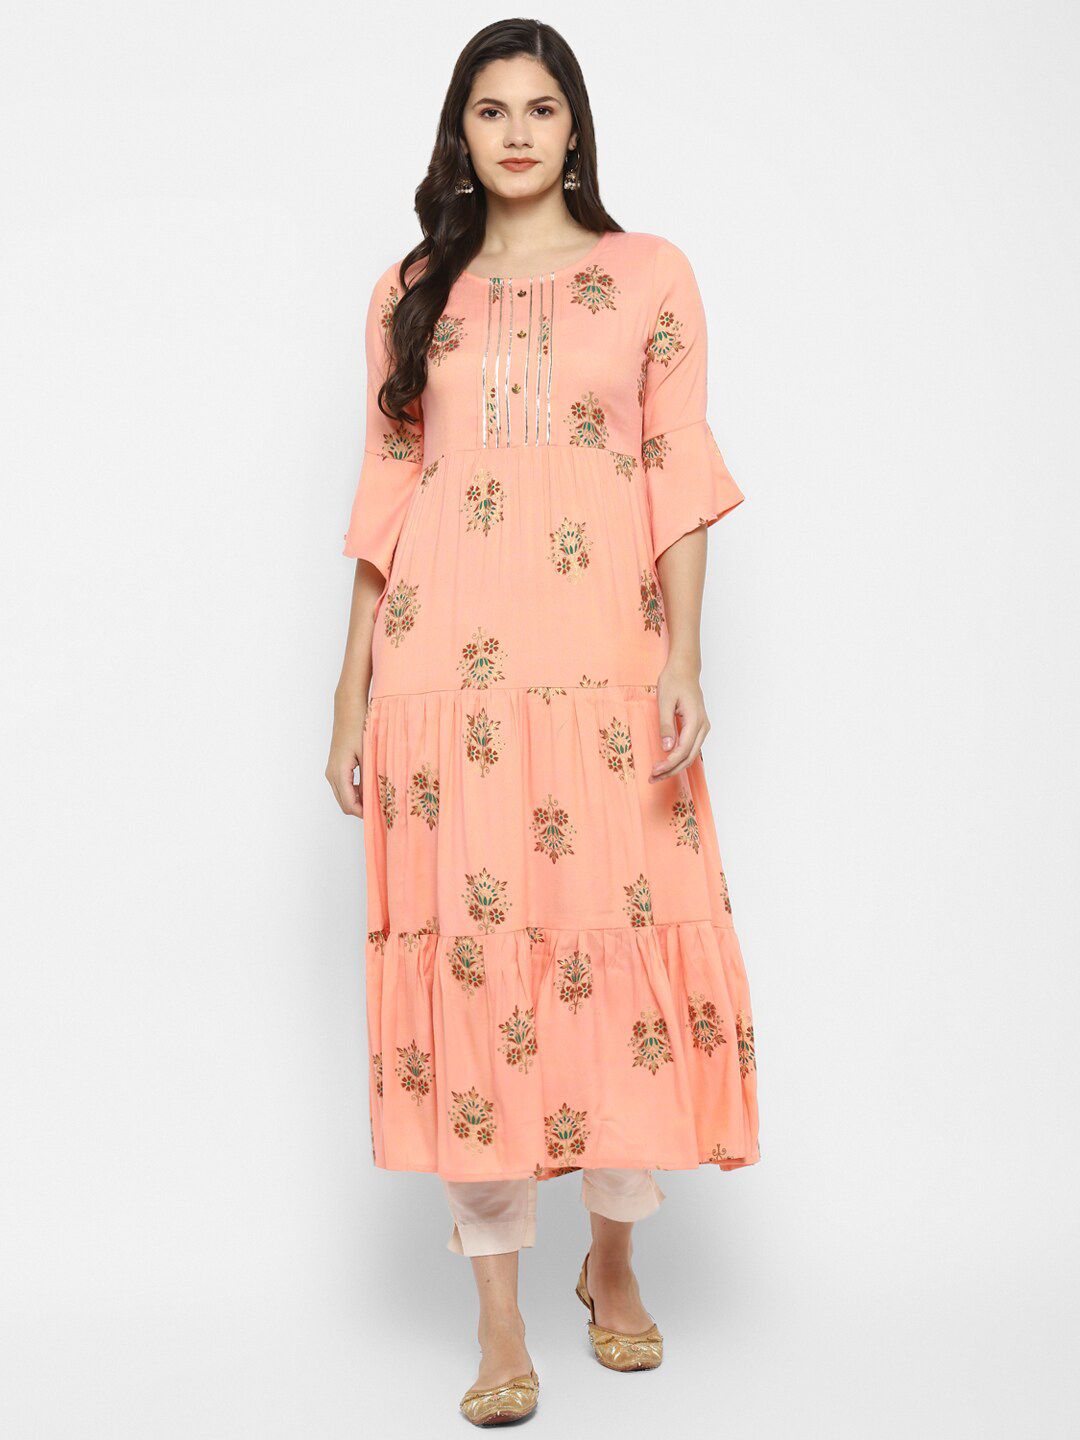 VAABA Peach-Coloured Floral Ethnic A-Line Midi Dress Price in India